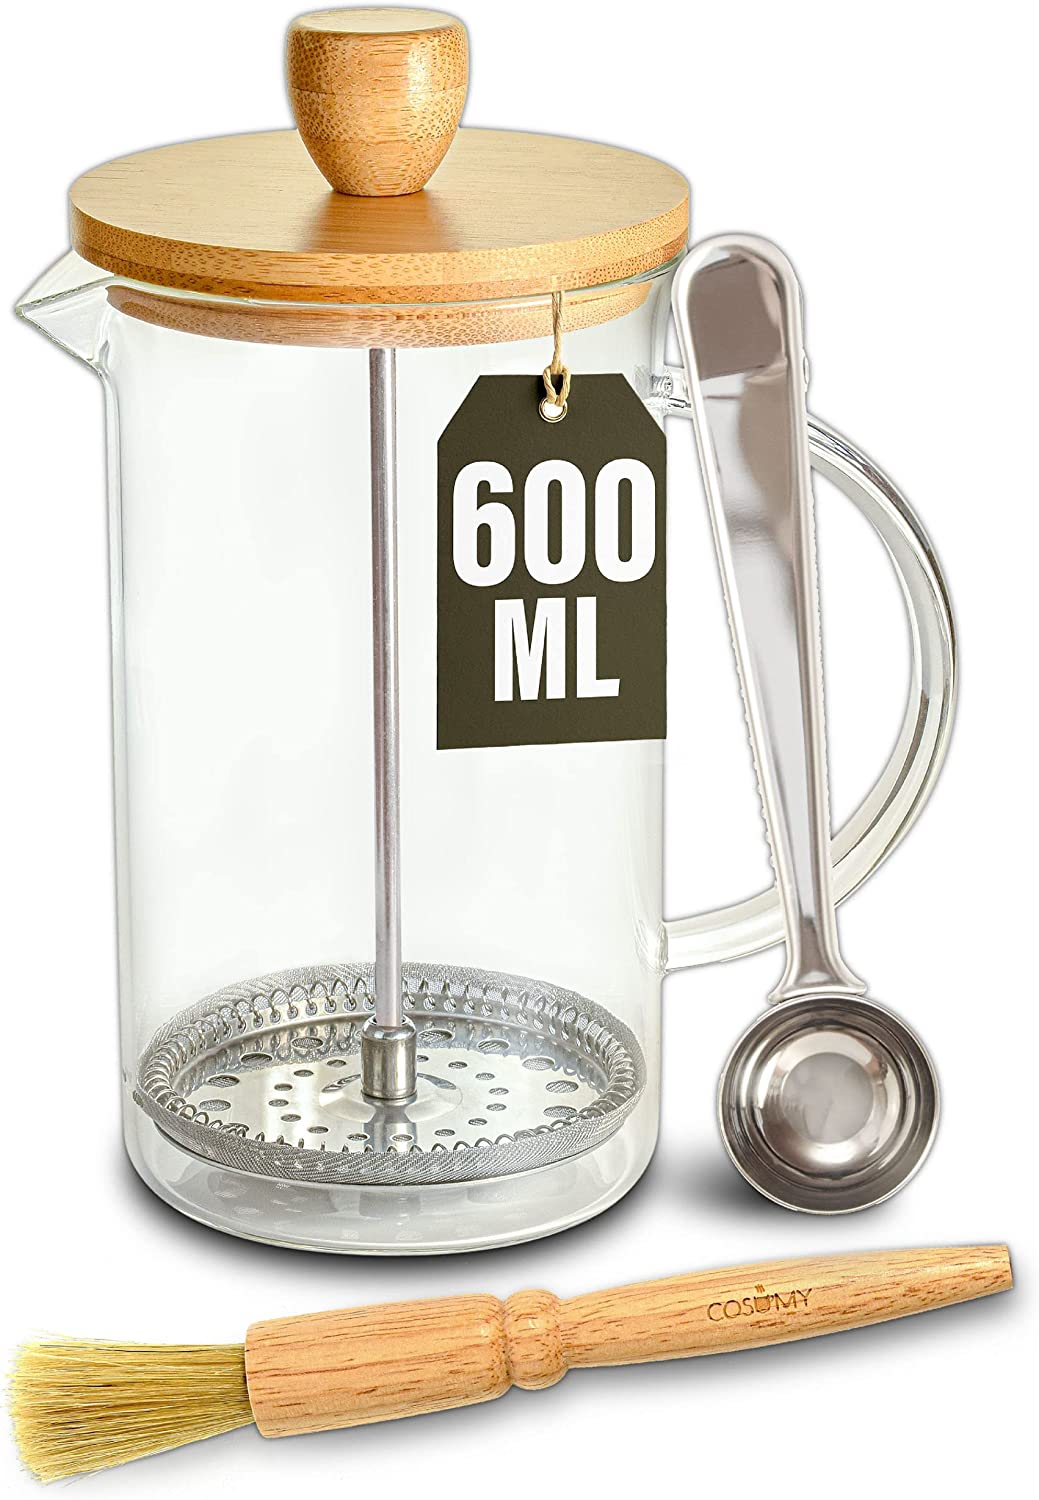 Cosumy French Press Glass (0.6 Litres) - Coffee Maker for 2 Cups of Coffee - With Dosing Spoon and Cleaning Brush